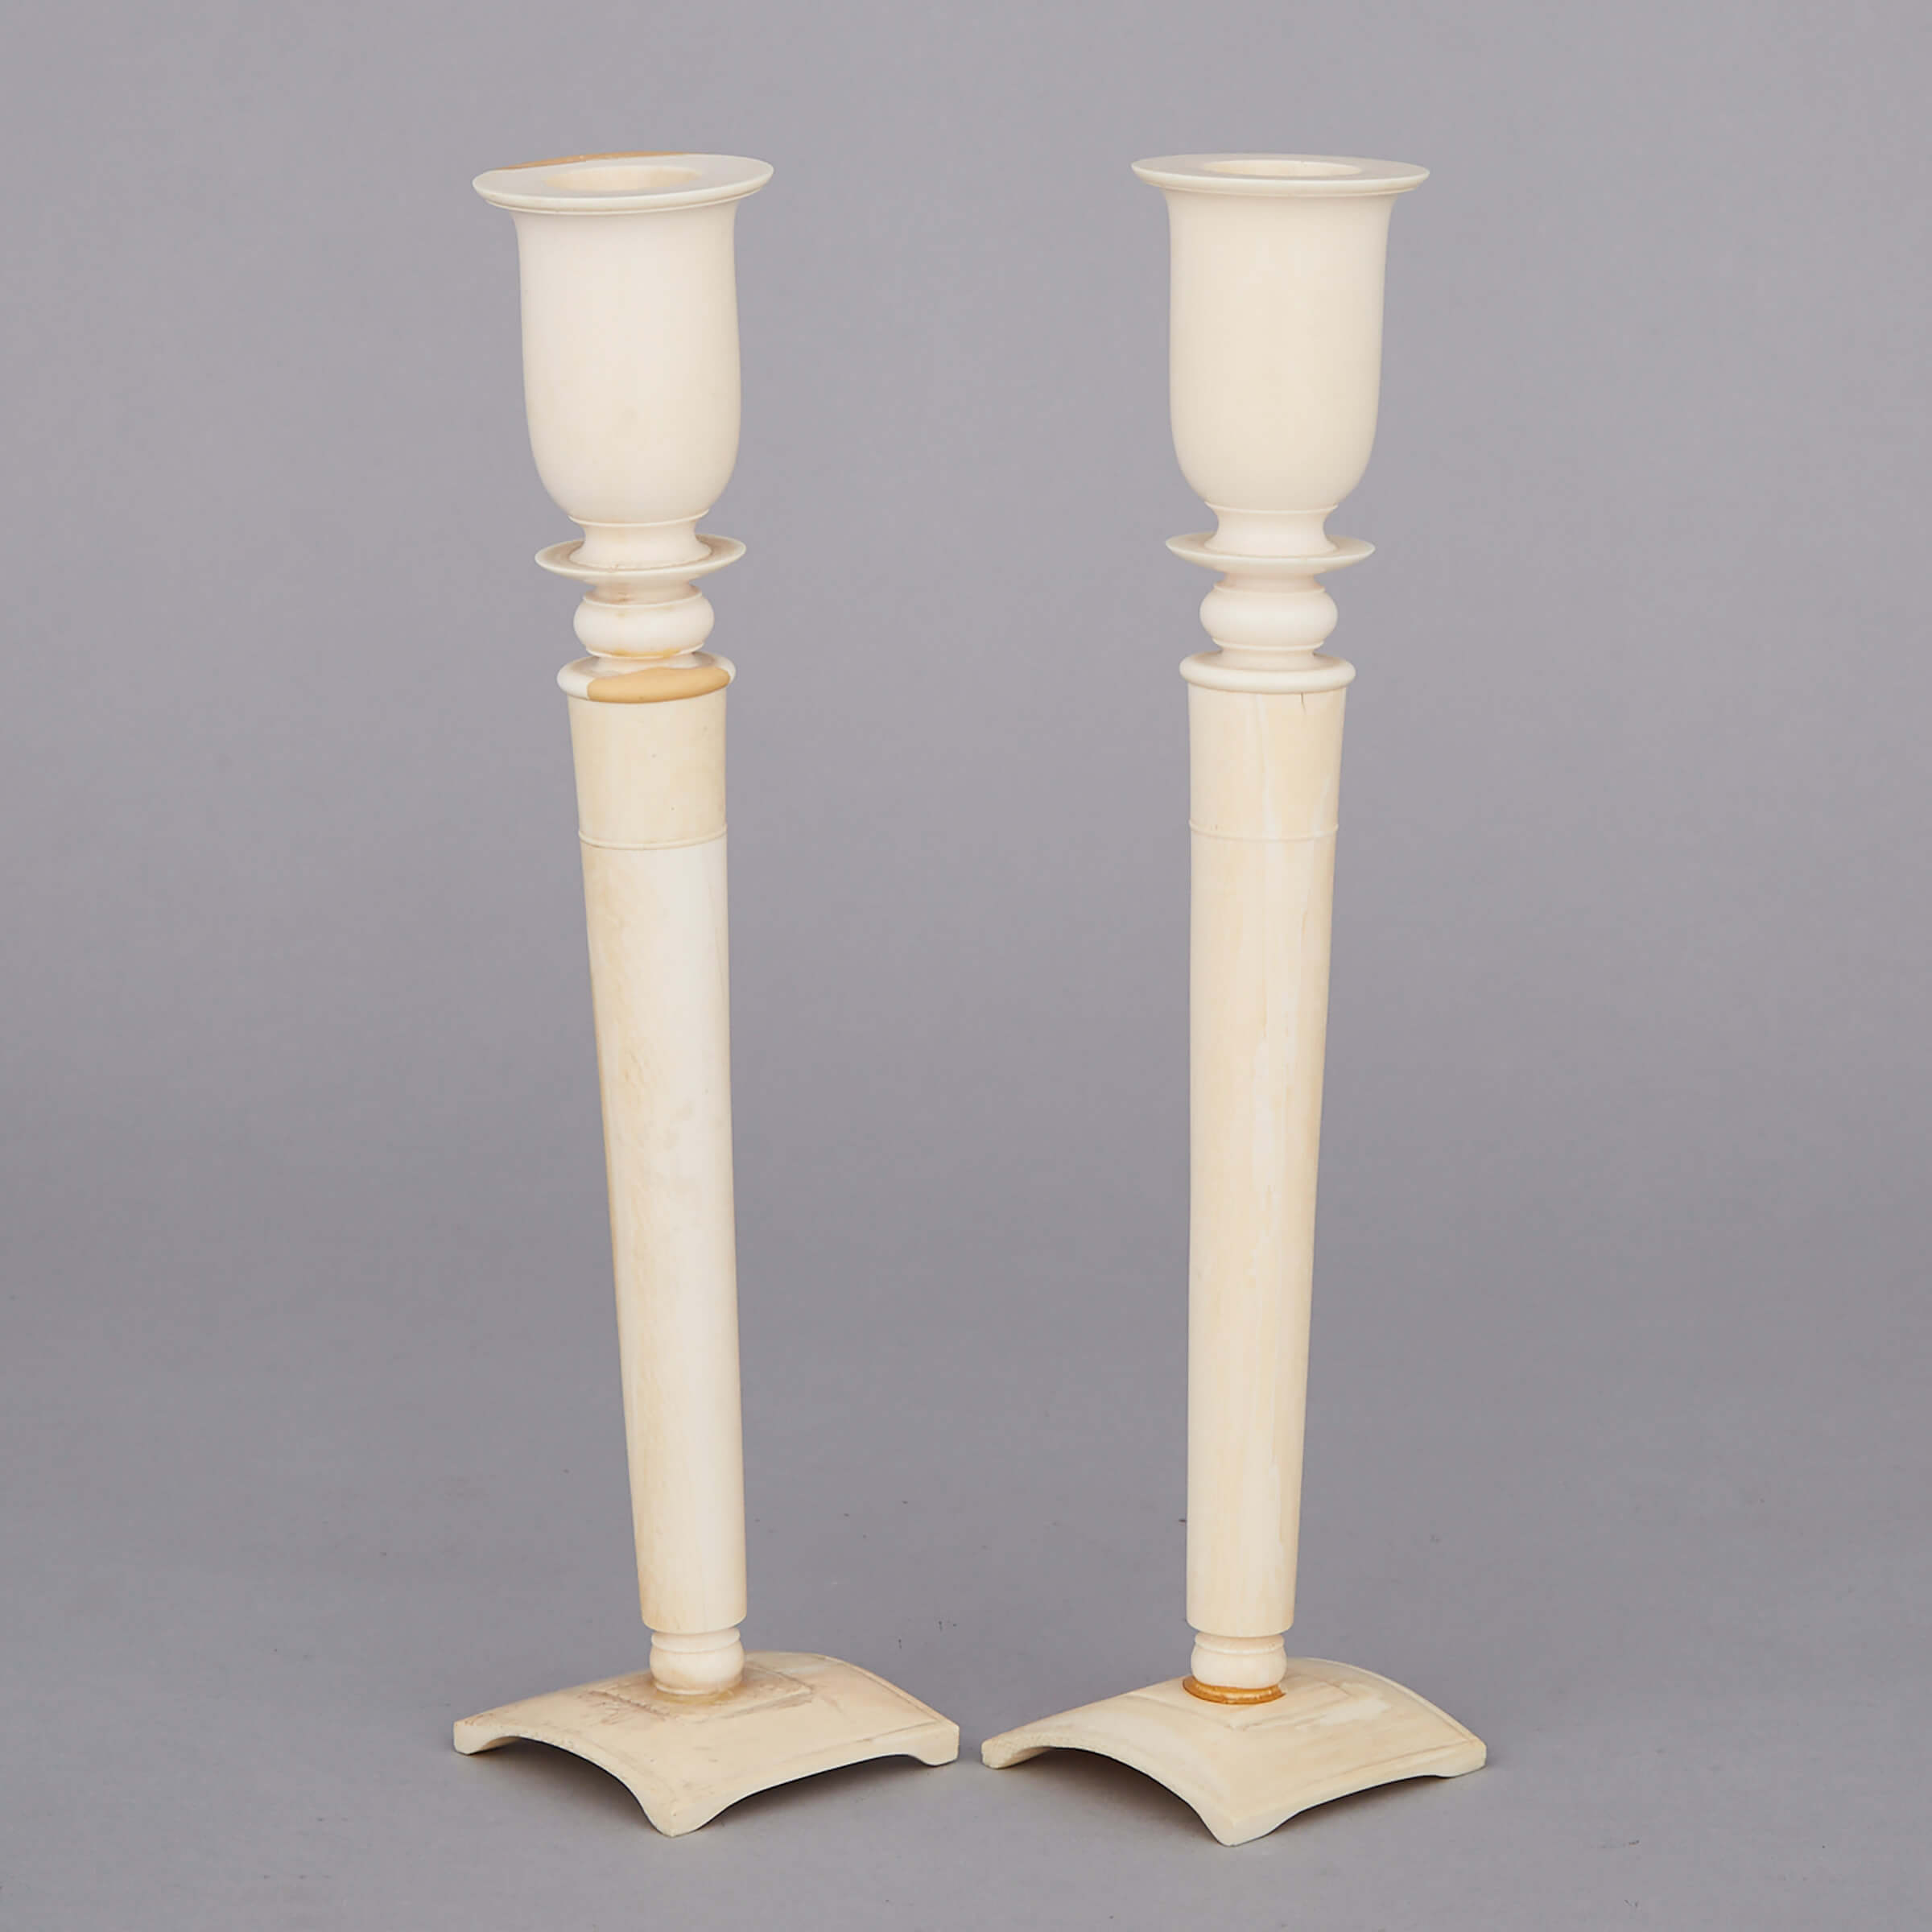 Pair of Anglo-Indian Turned Ivory Candlesticks, 19th century